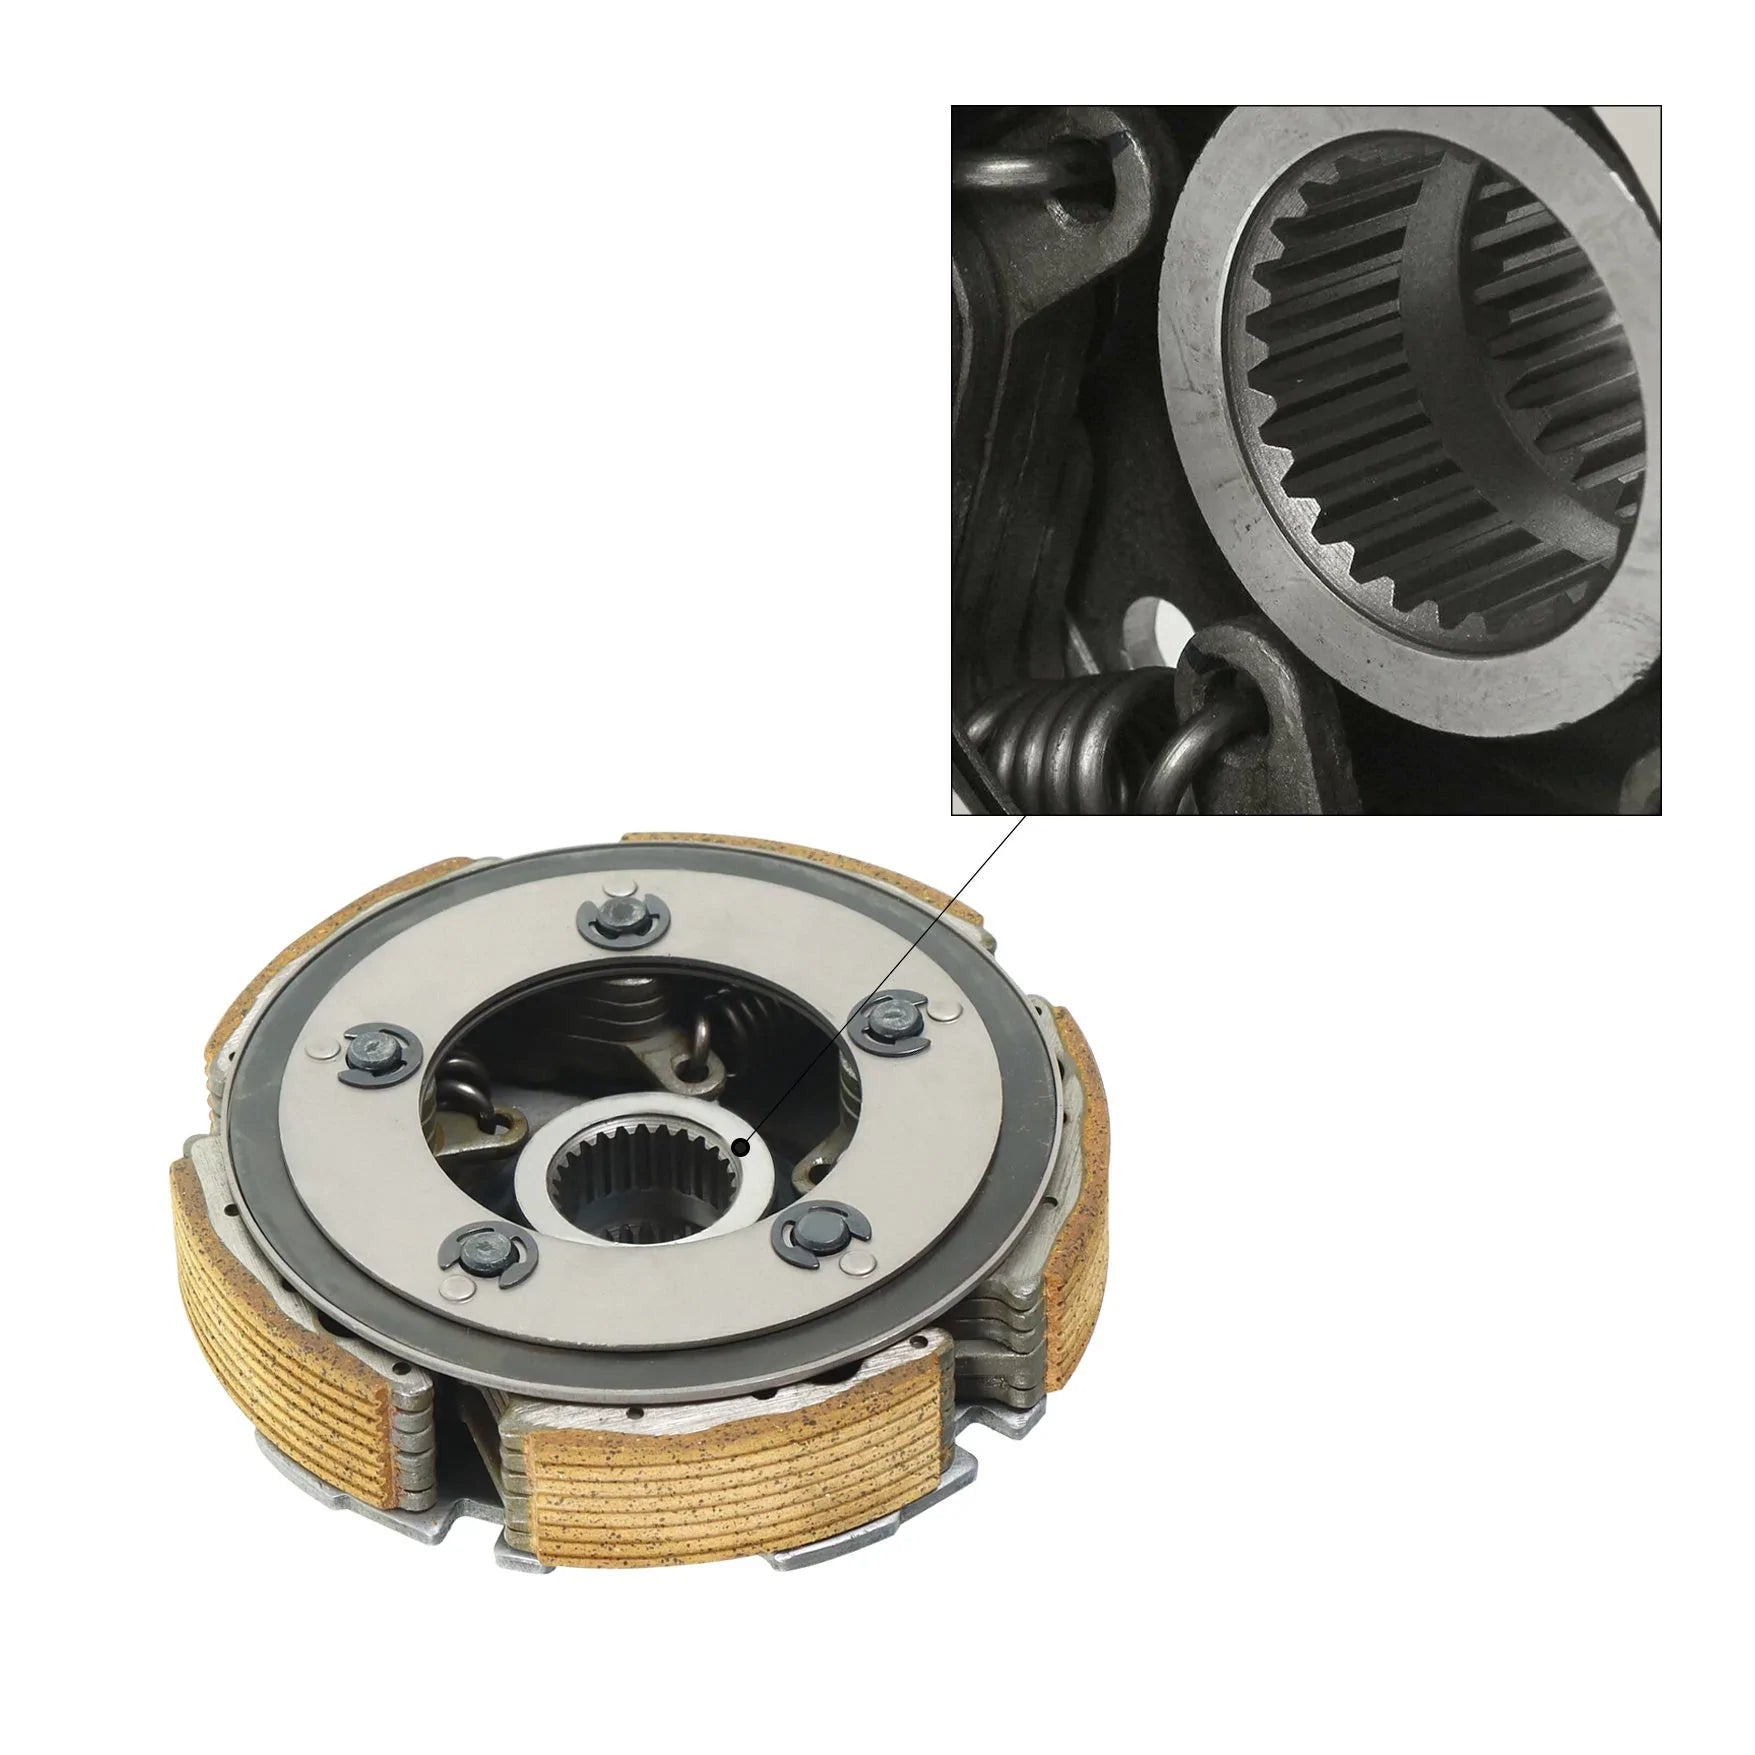 labwork Wet Clutch Pad Shoe and Gasket Replacement for 2004-2007 Yamaha Rhino 660 YFM660 YXR LAB WORK MOTO